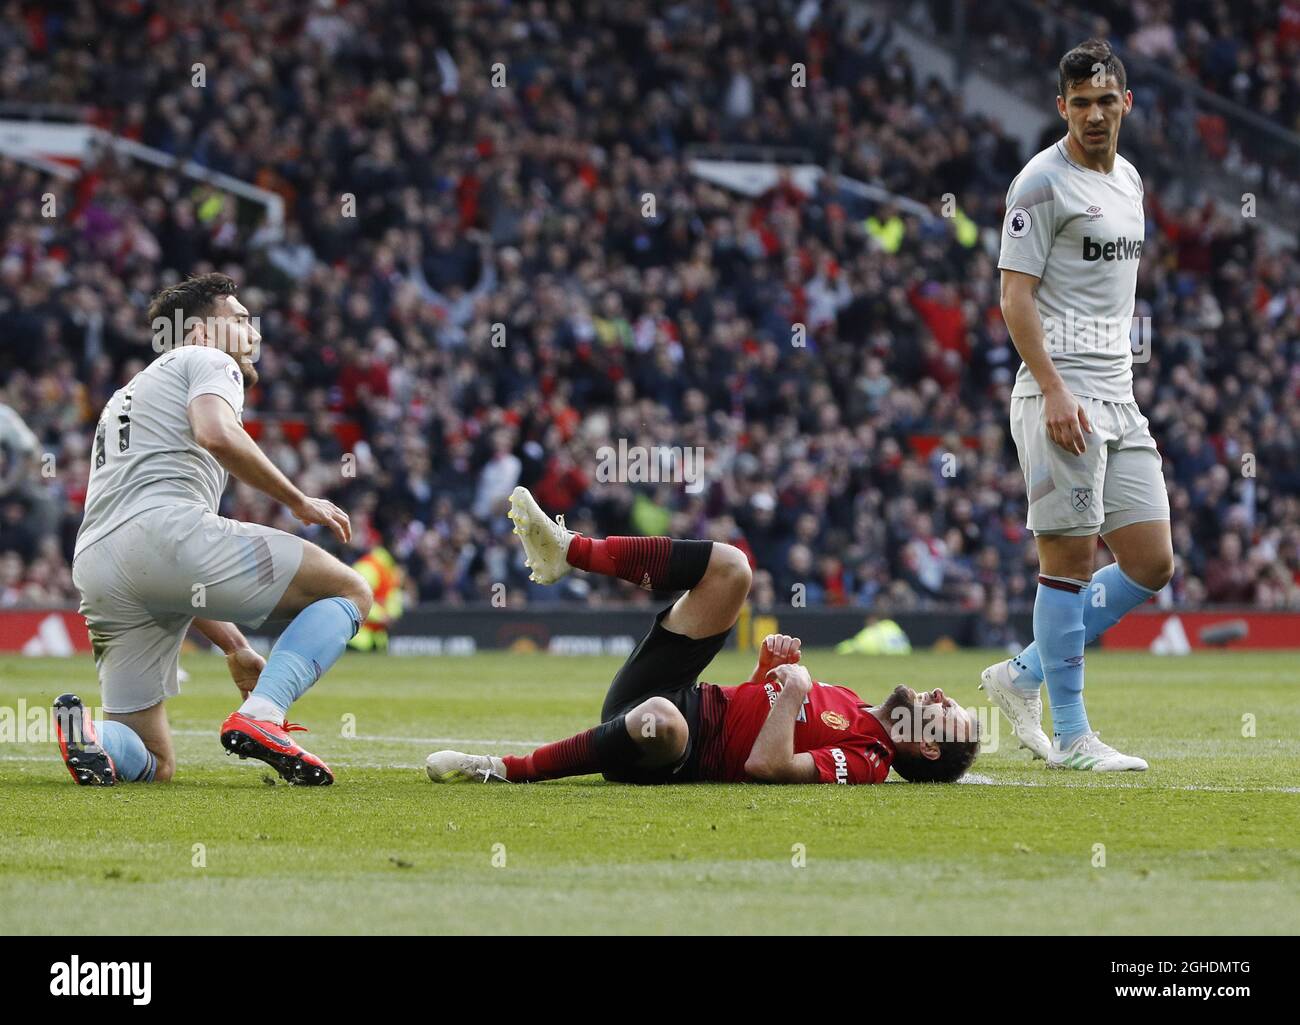 Robert Snodgrass of West Ham United challenges Juan Mata of Manchester United and Mata is awarded a penalty  during the Premier League match at Old Trafford, Manchester. Picture date: 13th April 2019. Picture credit should read: Darren Staples/Sportimage via PA Images Stock Photo